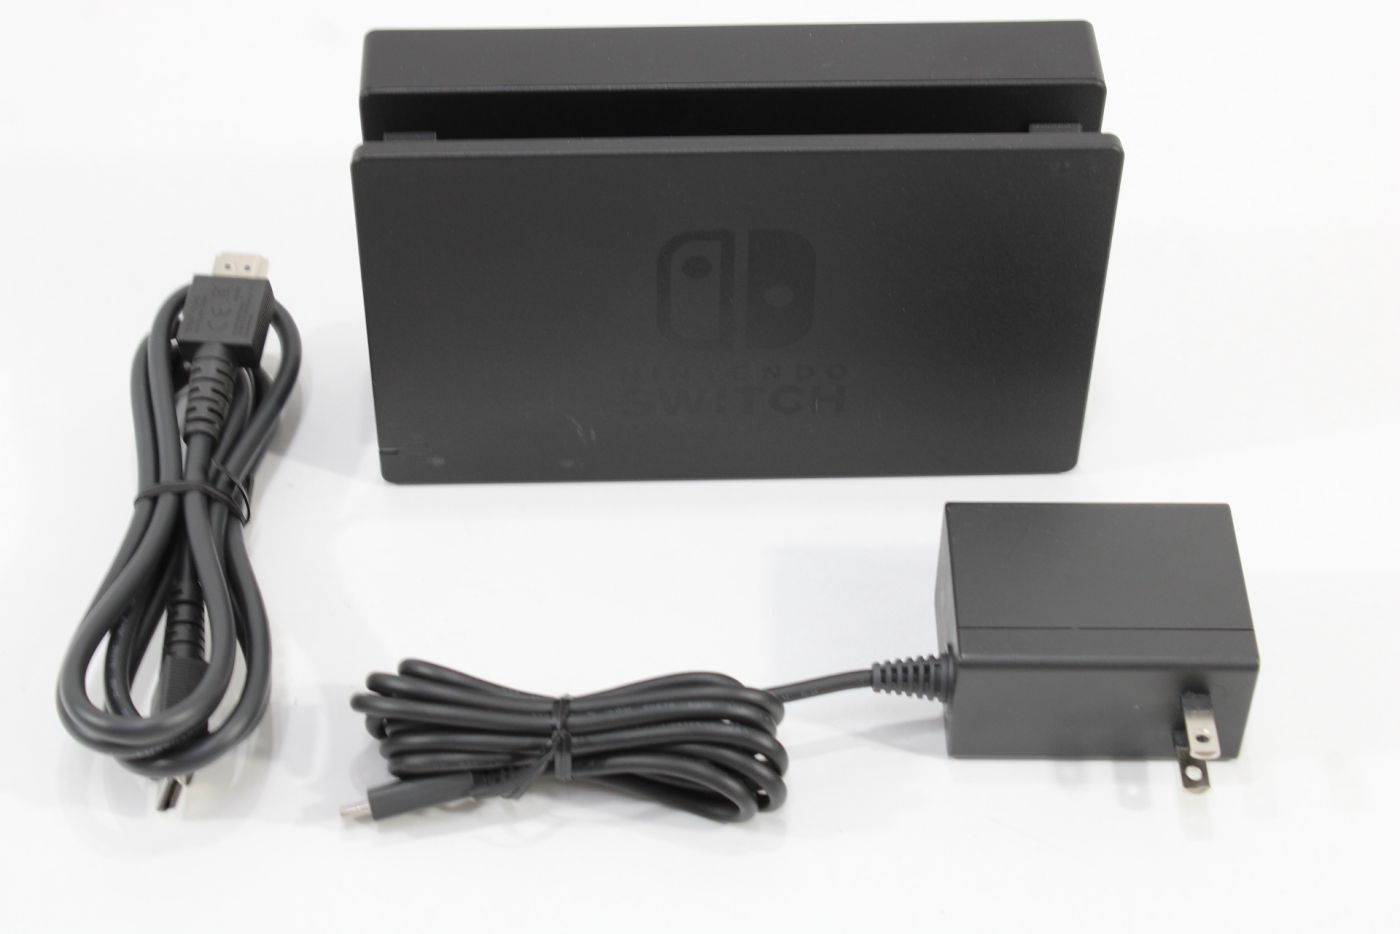 Nintendo Switch Dock Set with HDMI & AC Adapter - Black (Used